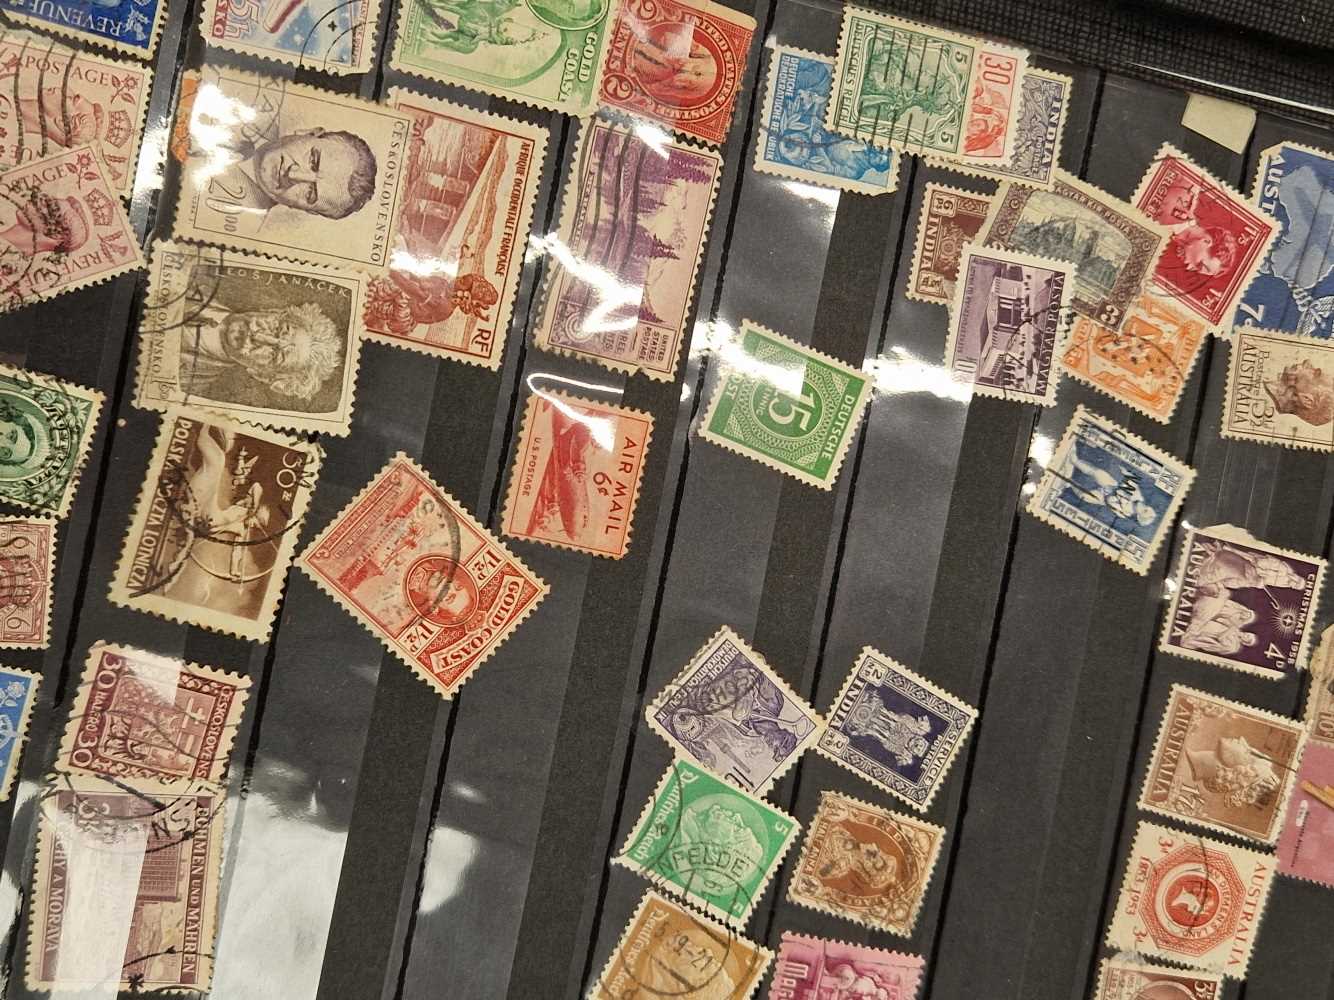 An album of various world stamps. - Image 2 of 5